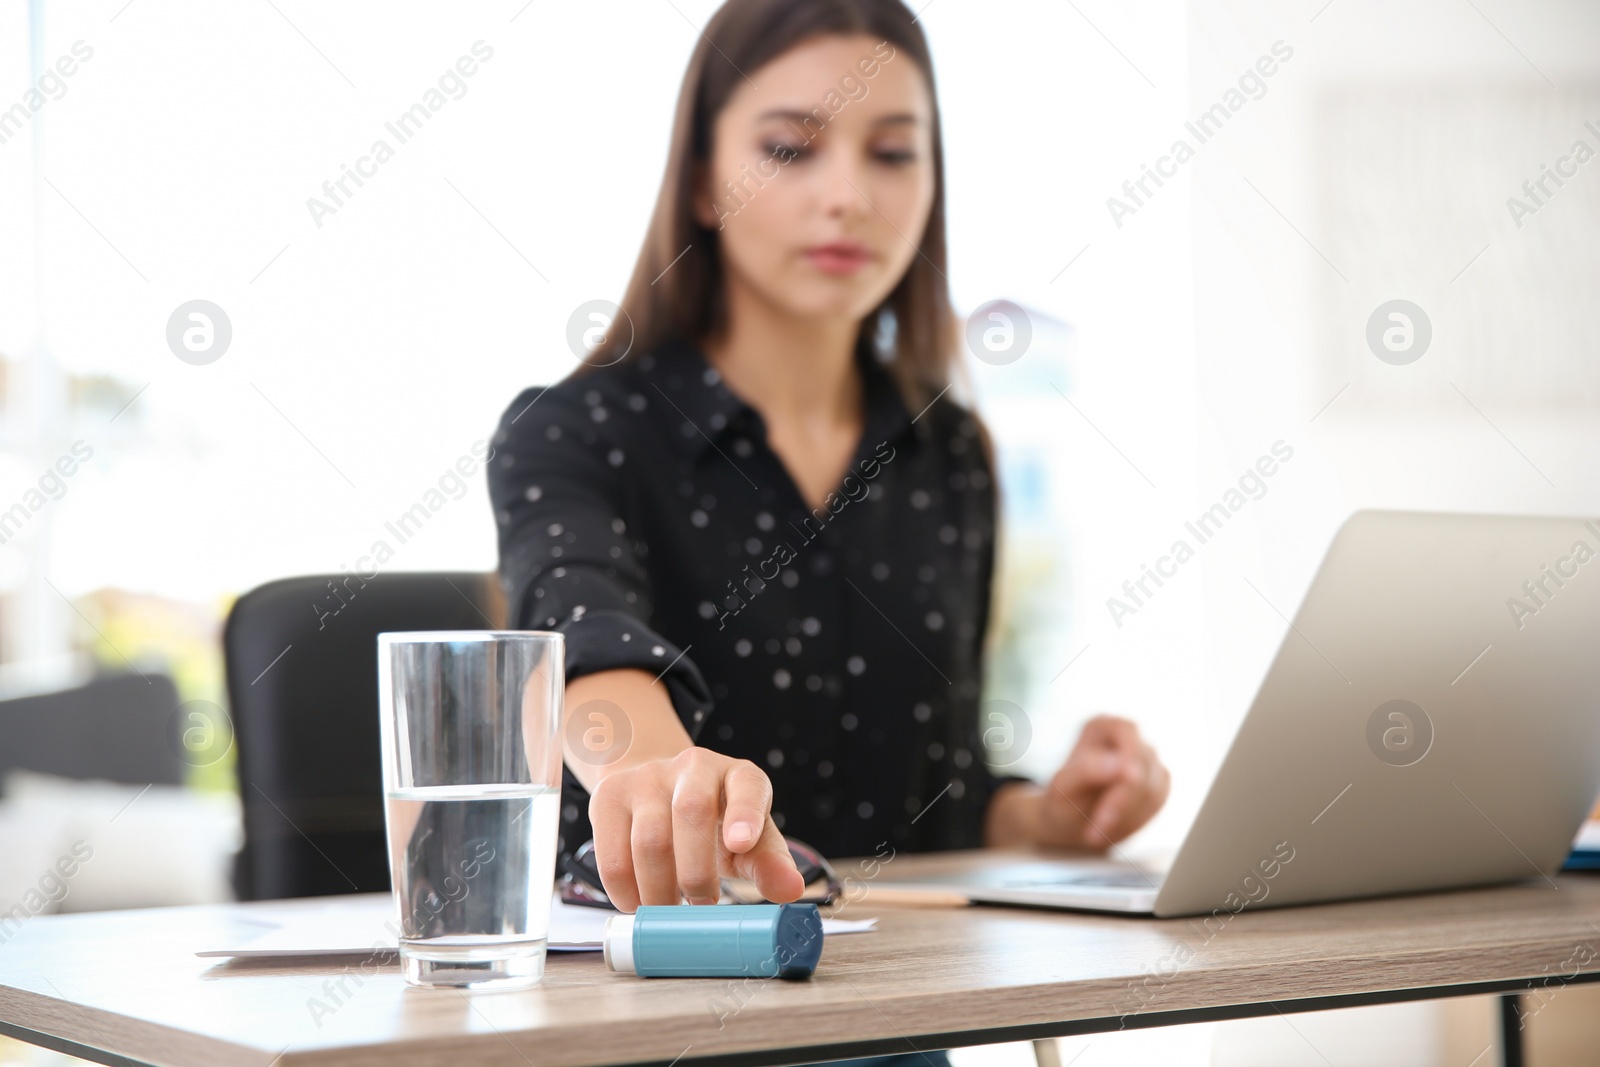 Photo of Woman with asthma inhaler at table in light room